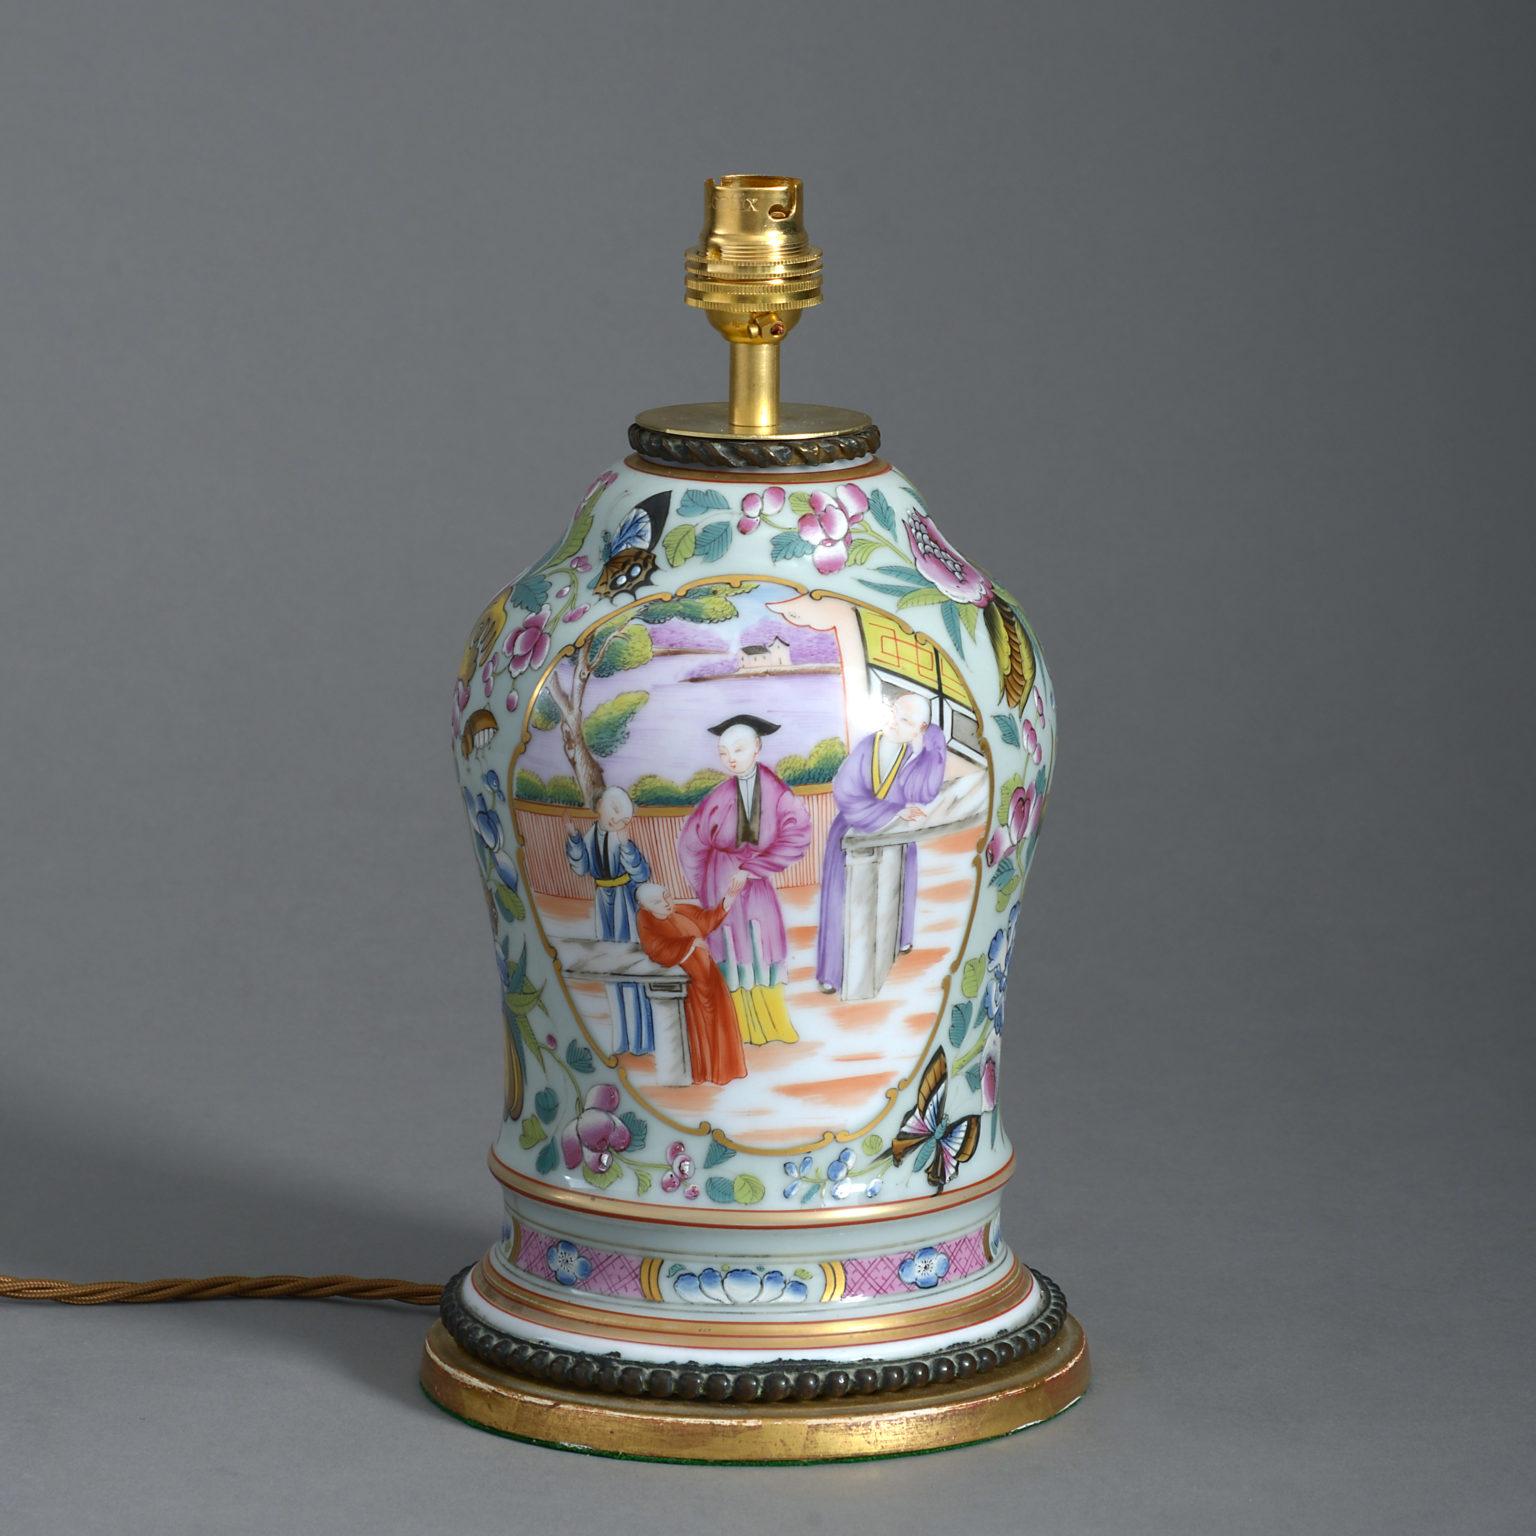 A late 19th century famille rose porcelain vase, decorated with figurative cartouches, set upon a ground of stylised insects and butterflies. Mounted on a gilded base.

Dimensions refer to vase and base, excluding electrical components.

Shade